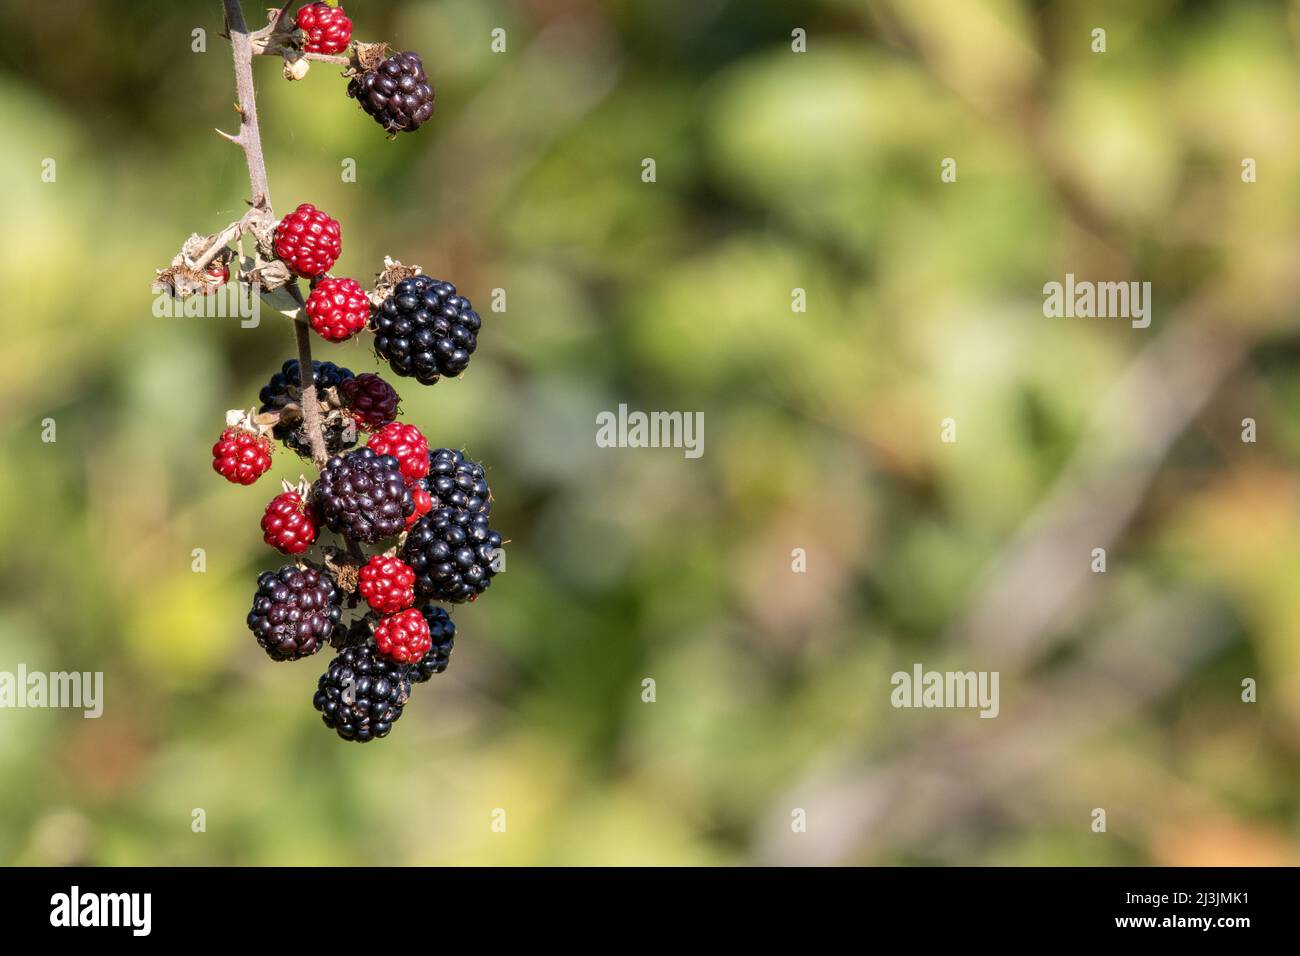 Blackberry fruit (genus Rubus) isolated on a natural pale green hedge background Stock Photo